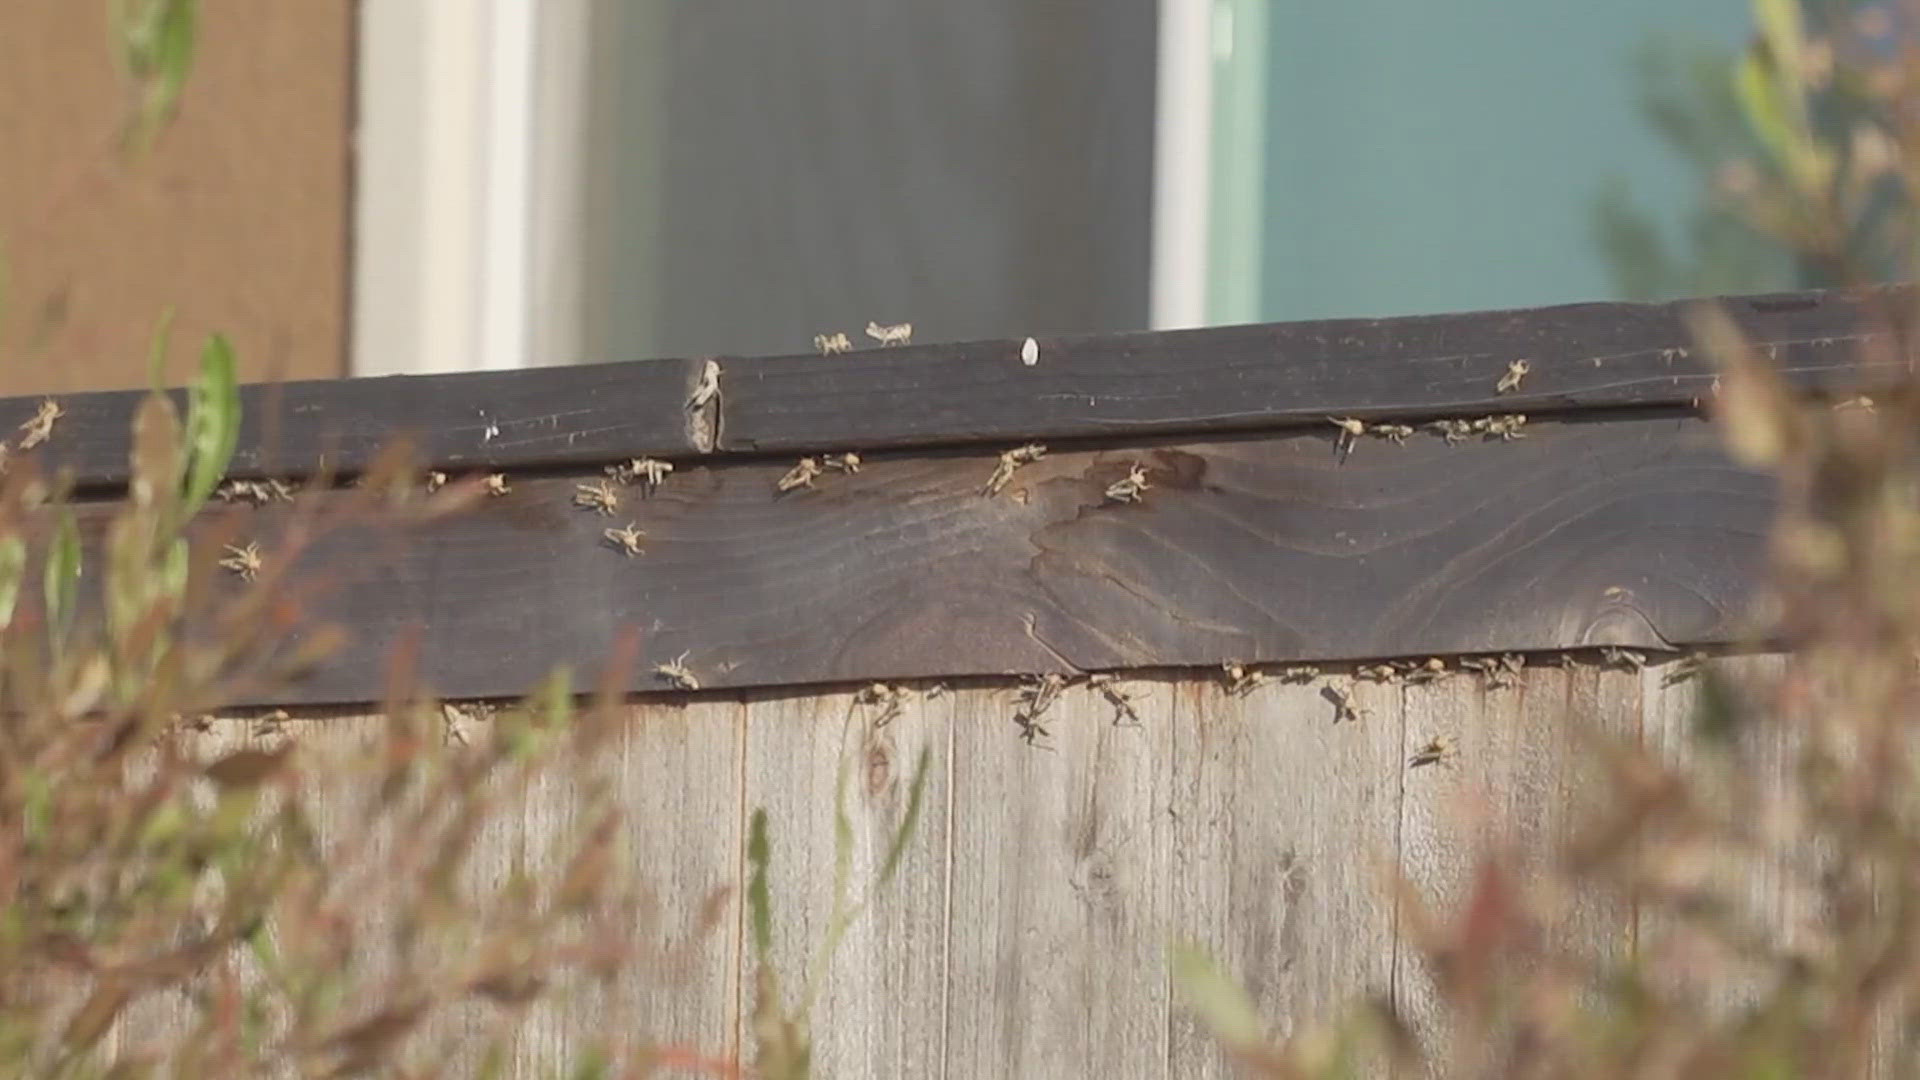 These locusts, also known simply as grasshoppers, are coming out of fields and swarming in nearby neighborhoods in what experts say are "special conditions."